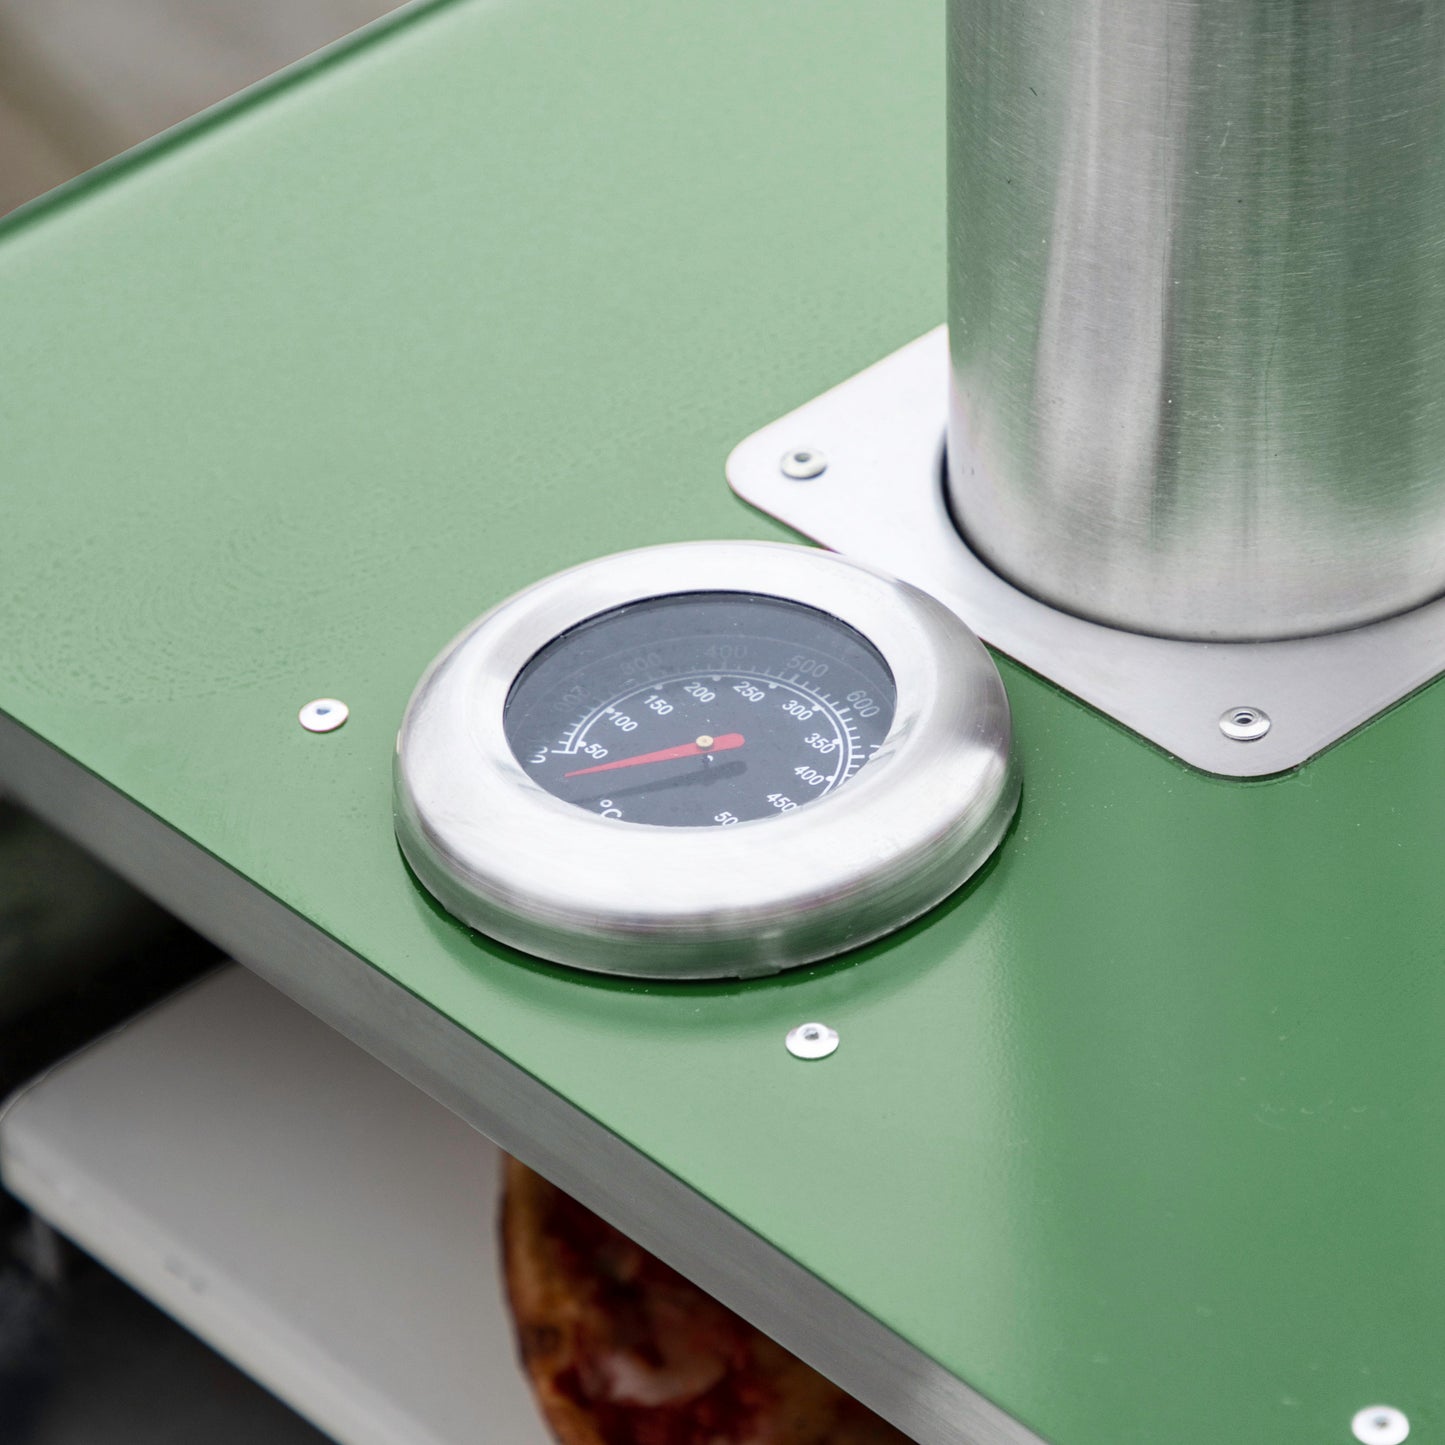 A Brixham Pellet Pizza Oven Green with a thermometer on it, perfect for interior decor or home furniture.